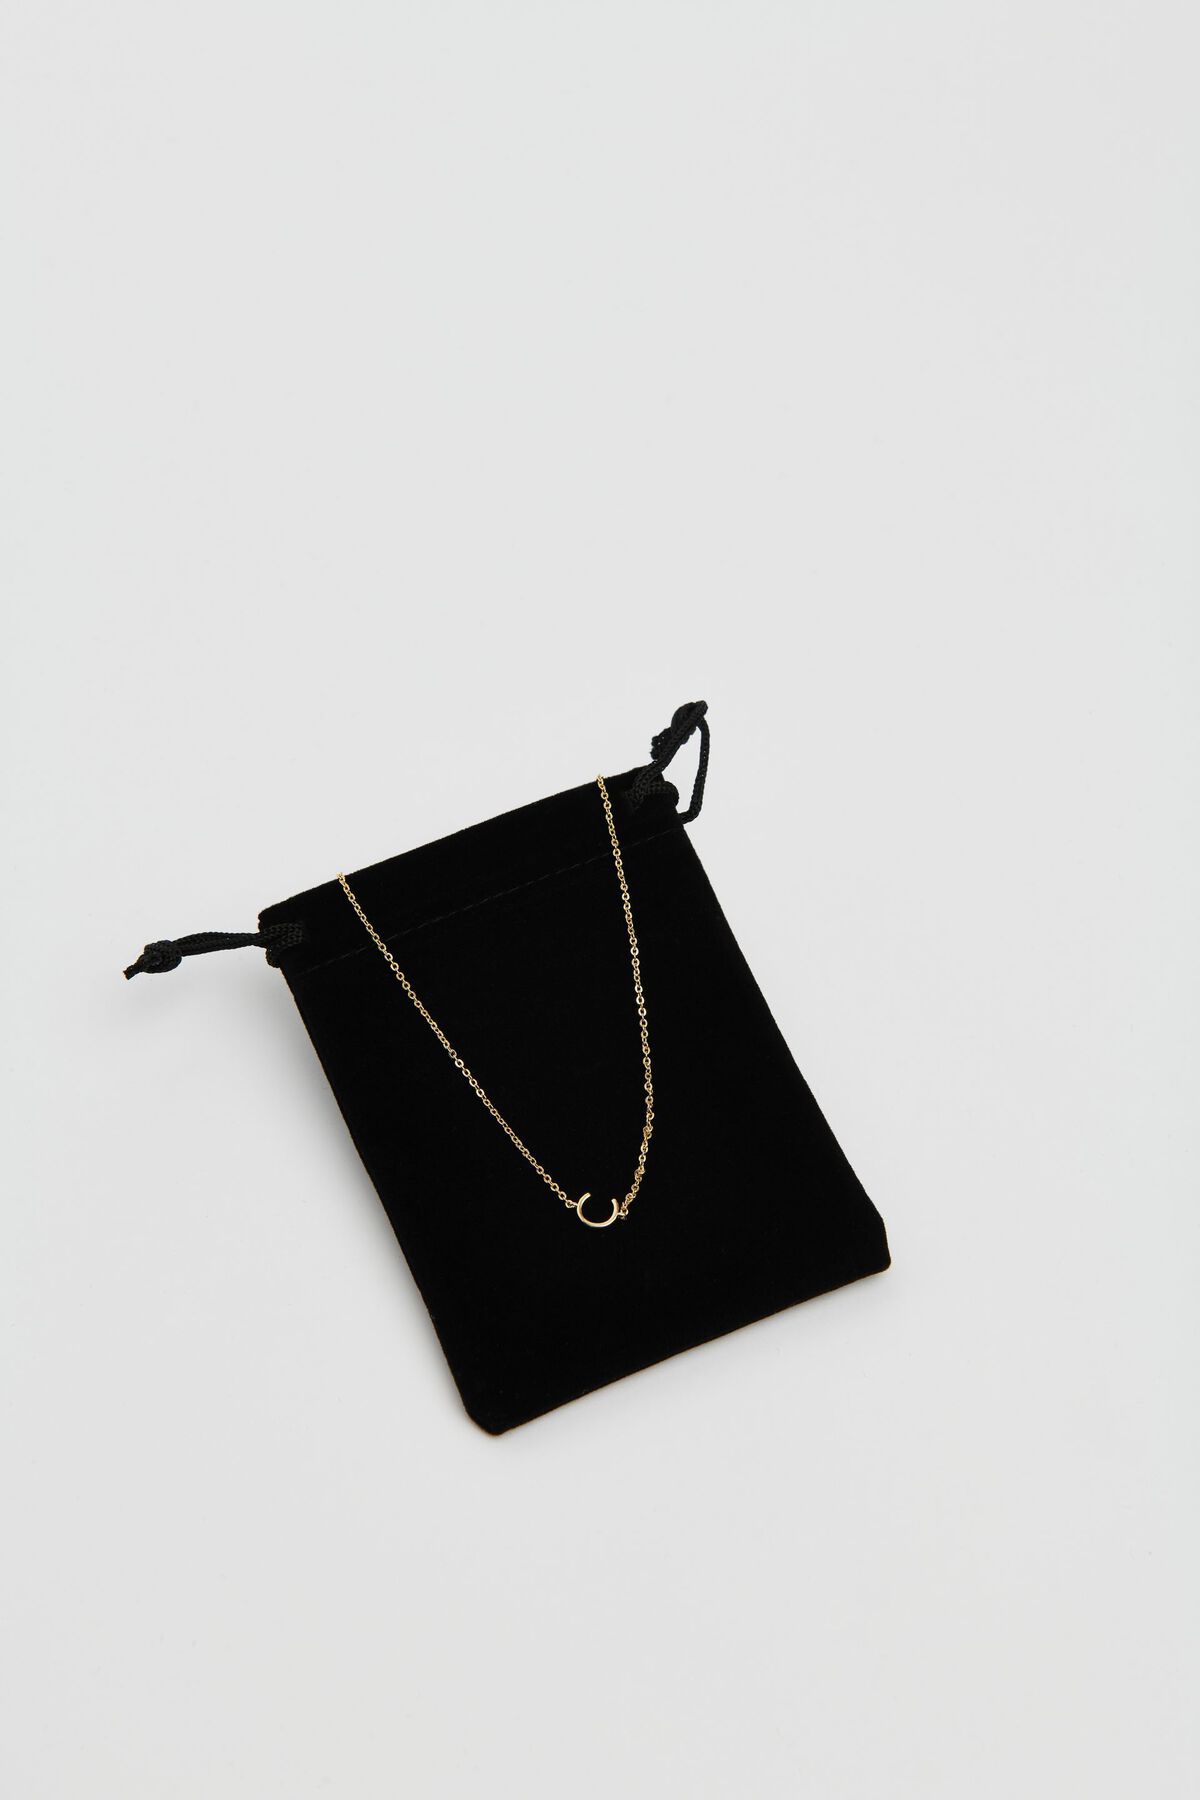 Garage 14K Gold Plated Initial Necklace. 6